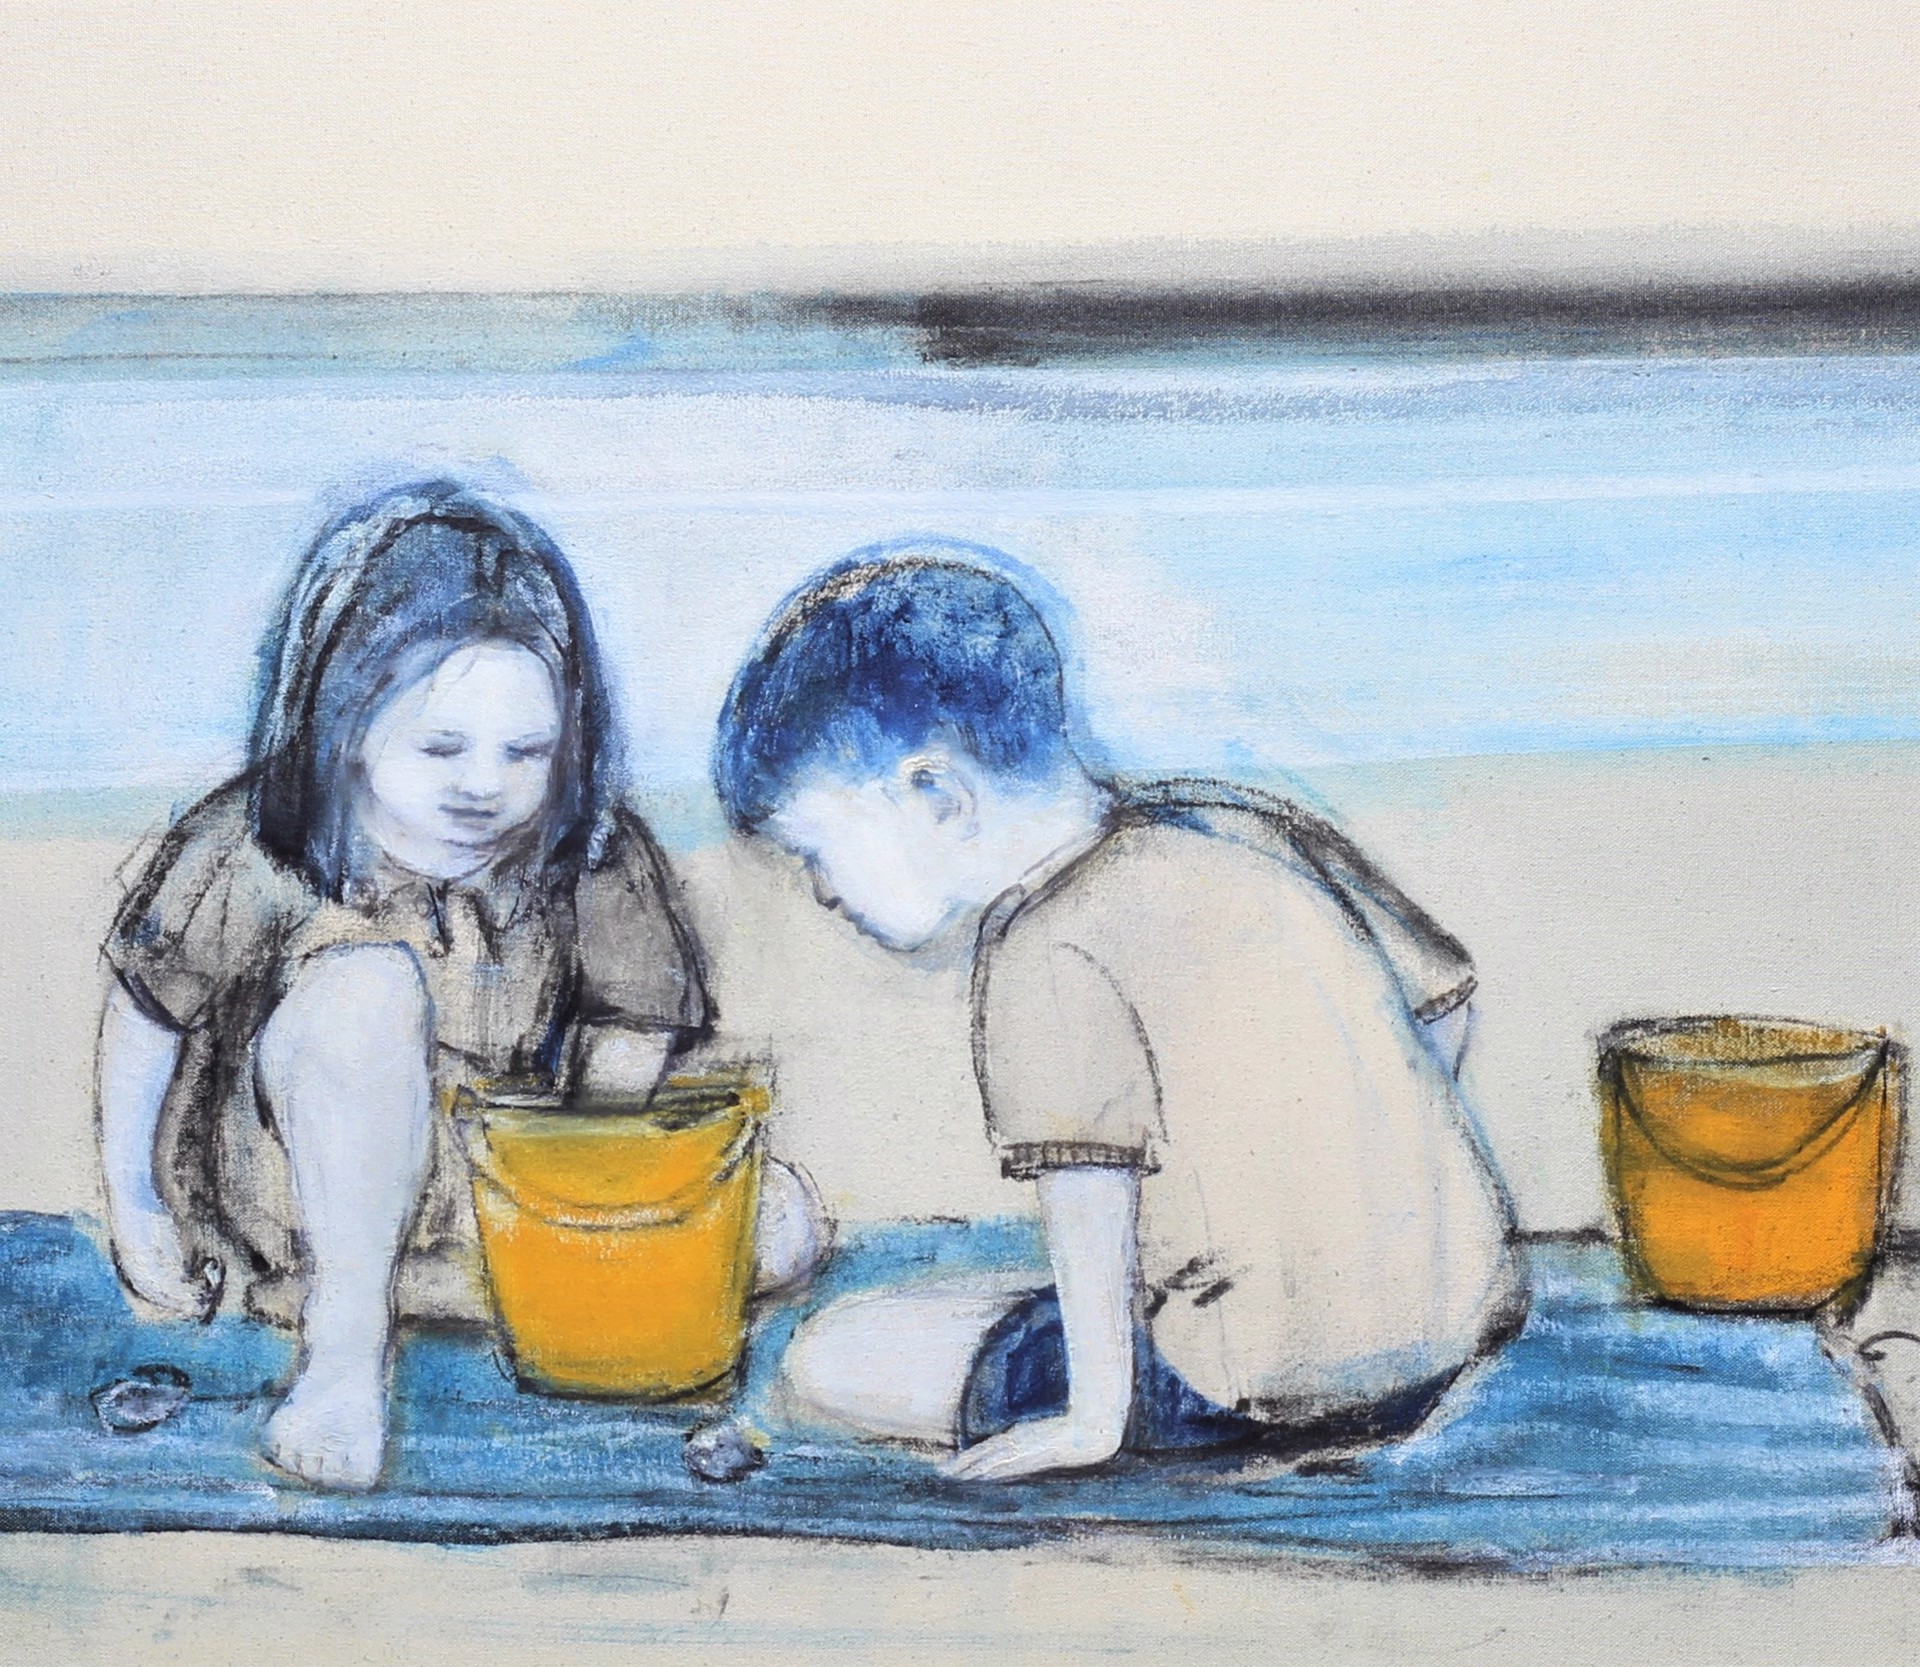 WE HAVE CRABS IN OUR BUCKET by CHRISTINA THWAITES (Figures)